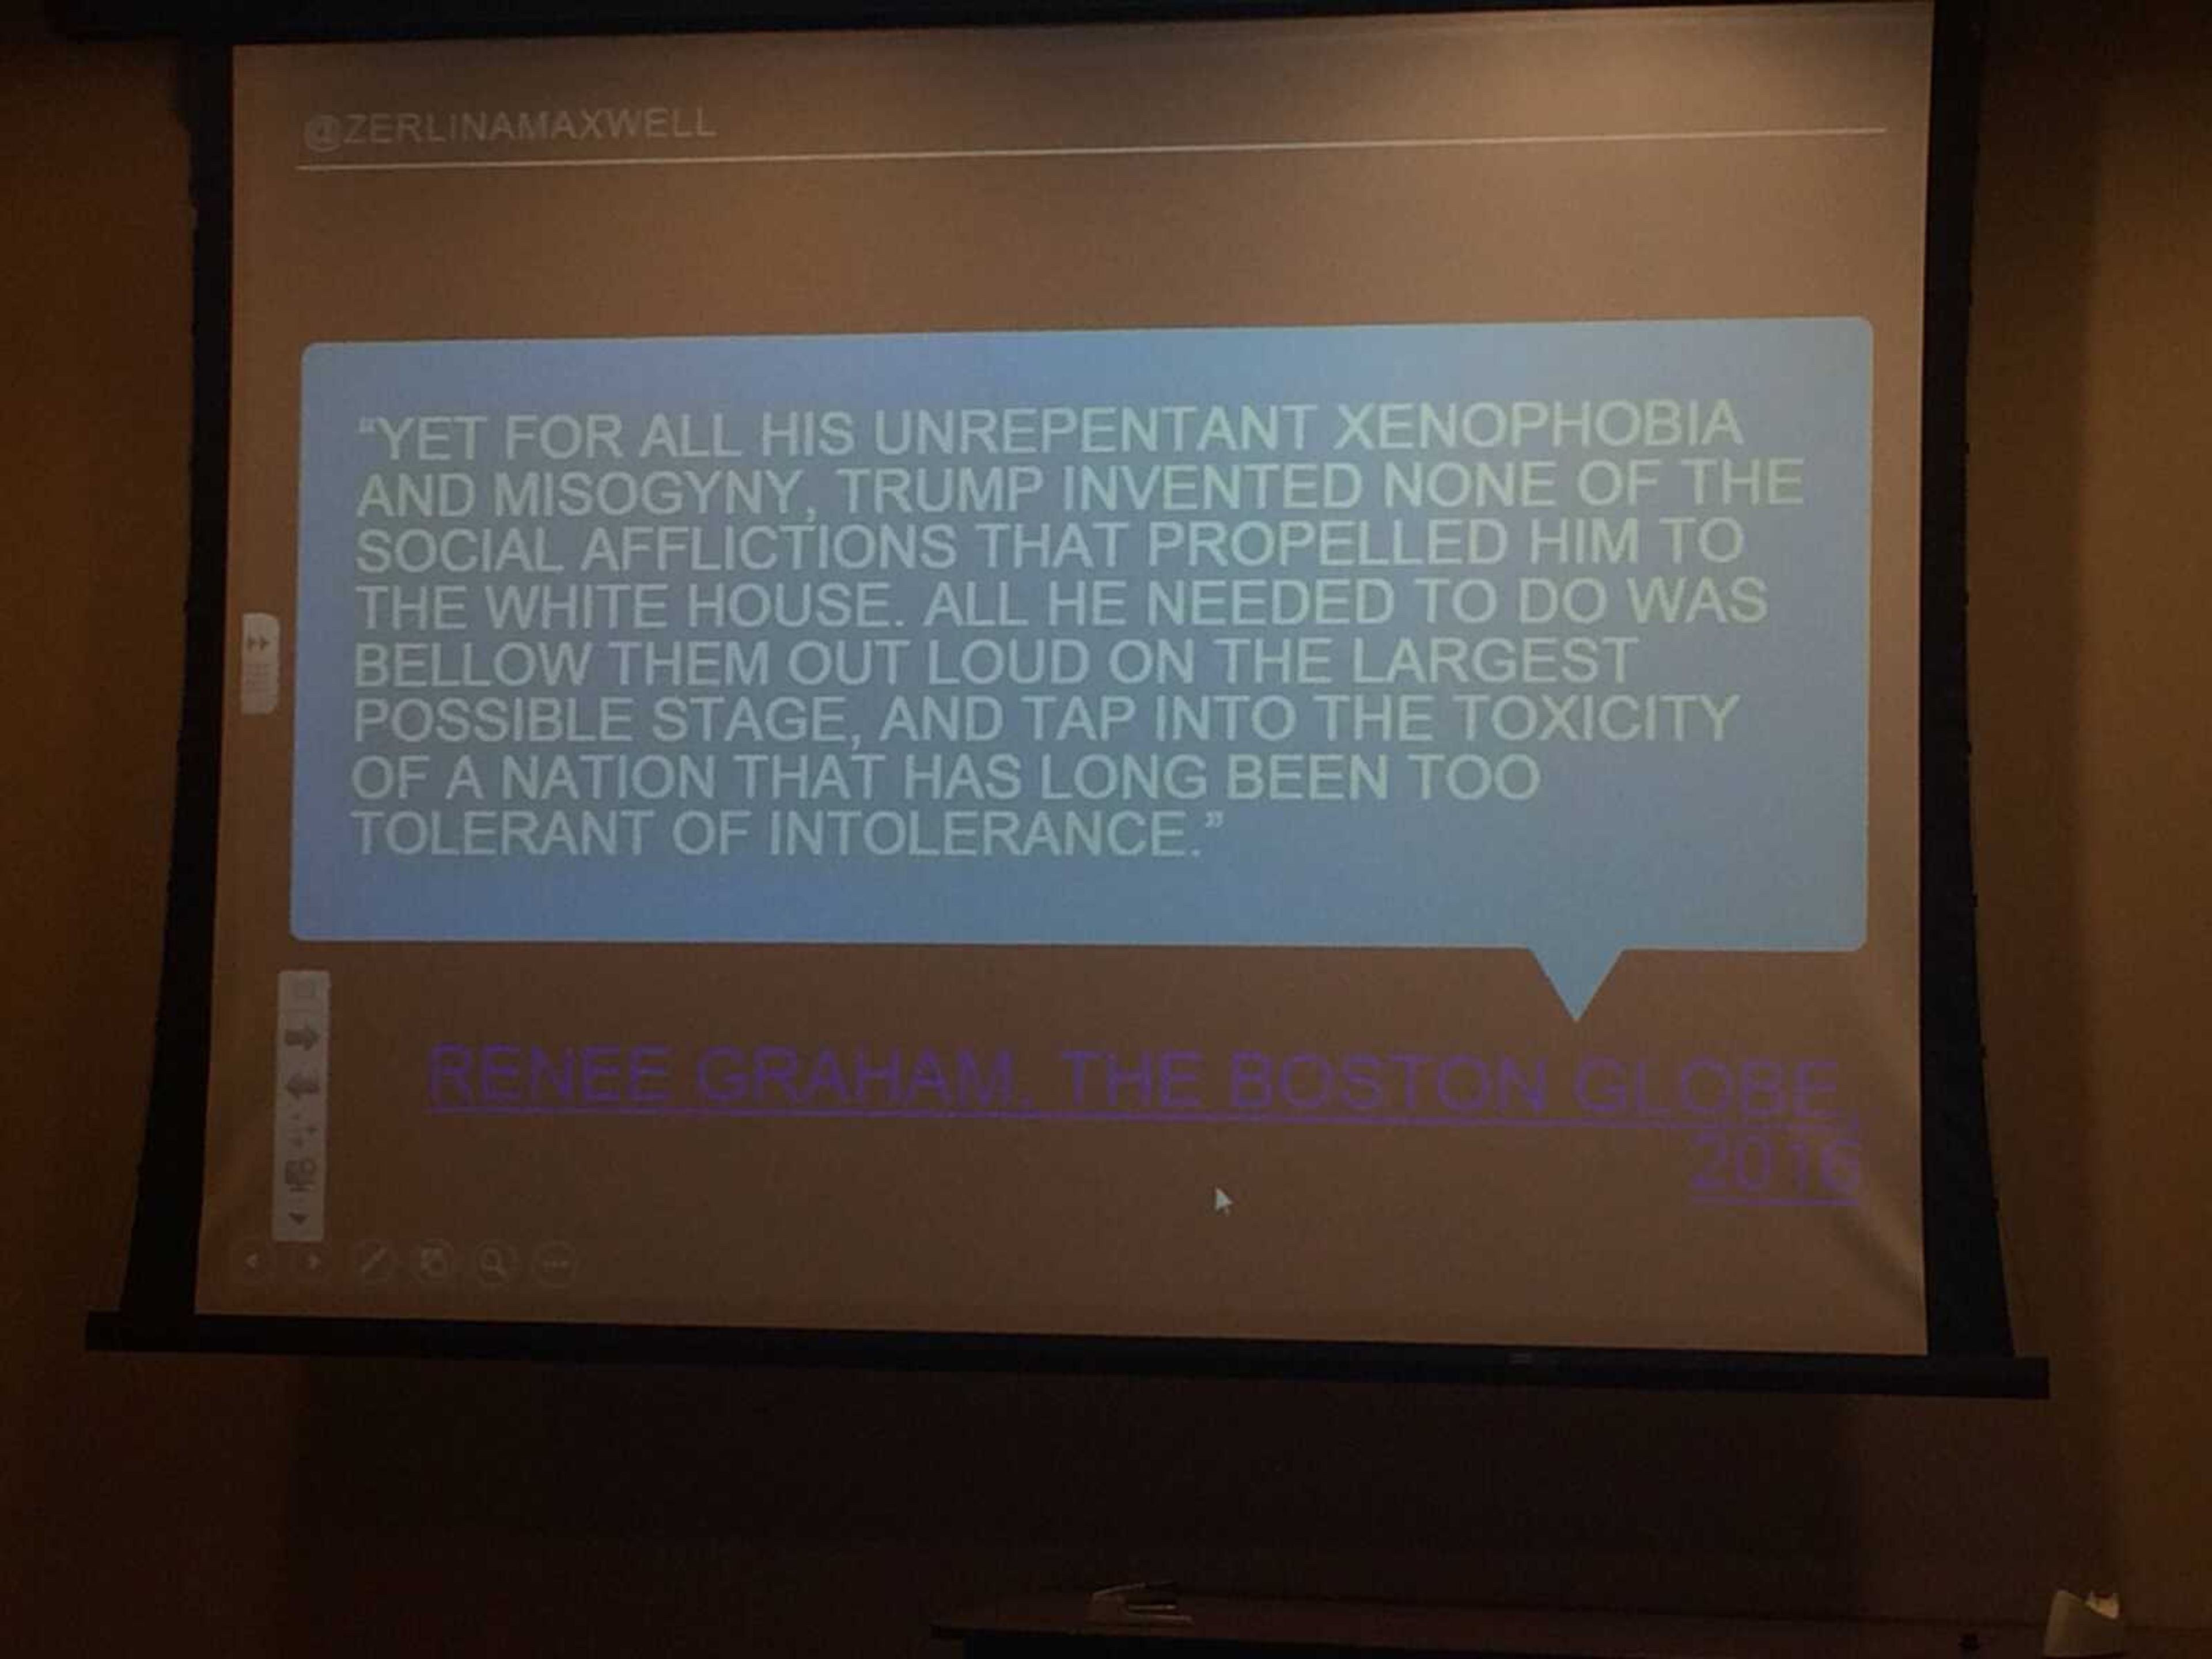 A quote from Renee Graham of The Boston Globe that Zerlina Maxwell includes in her presentation.